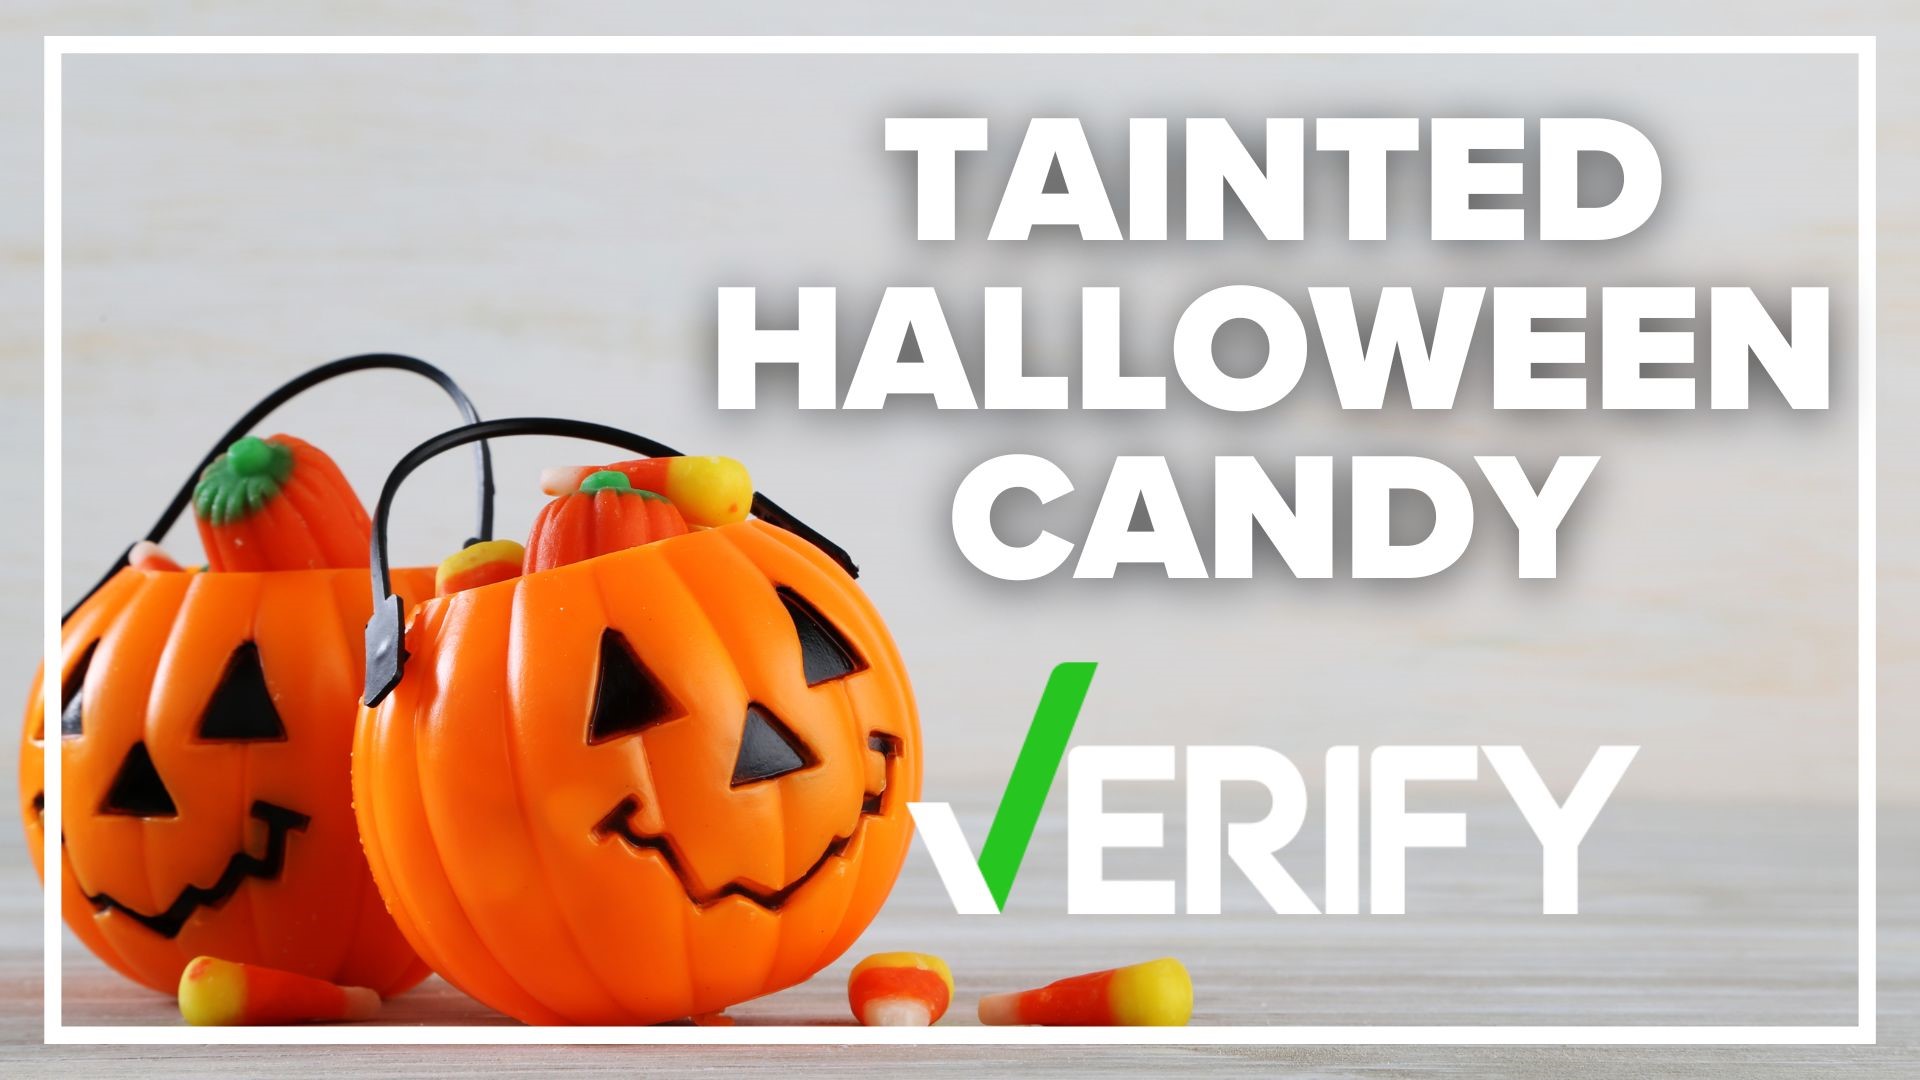 Police departments are warning parents about the dangers of tainted Halloween candy, but experts say reports of contaminated candy aren't very common.